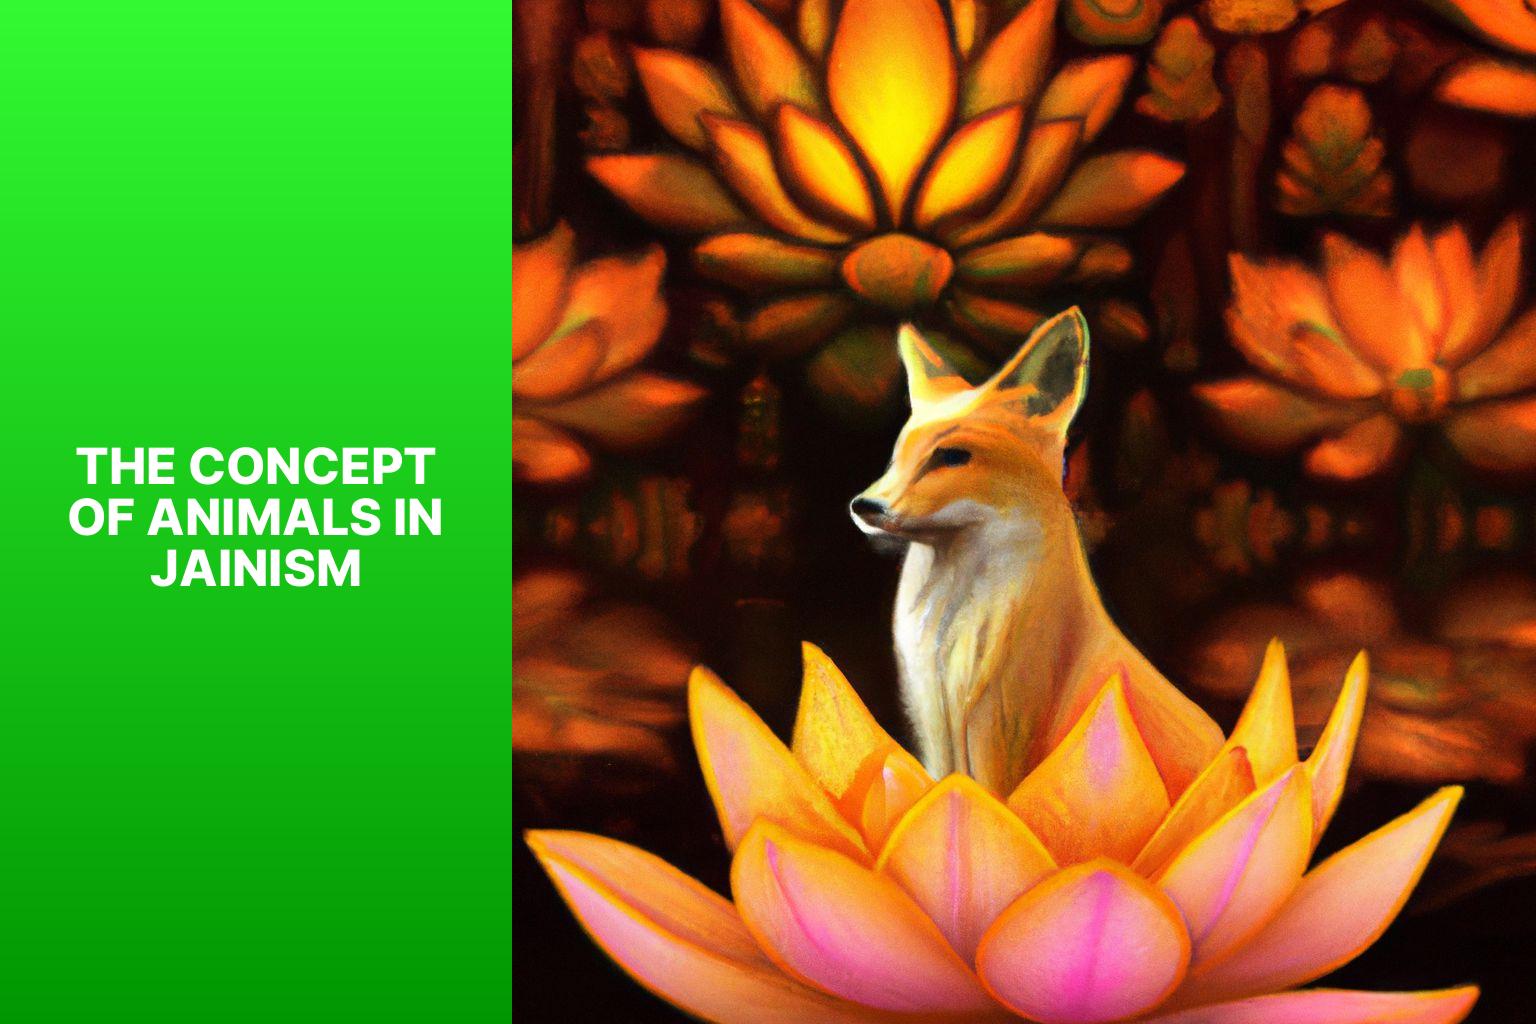 The Concept of Animals in Jainism - Fox Myths in Jainism 